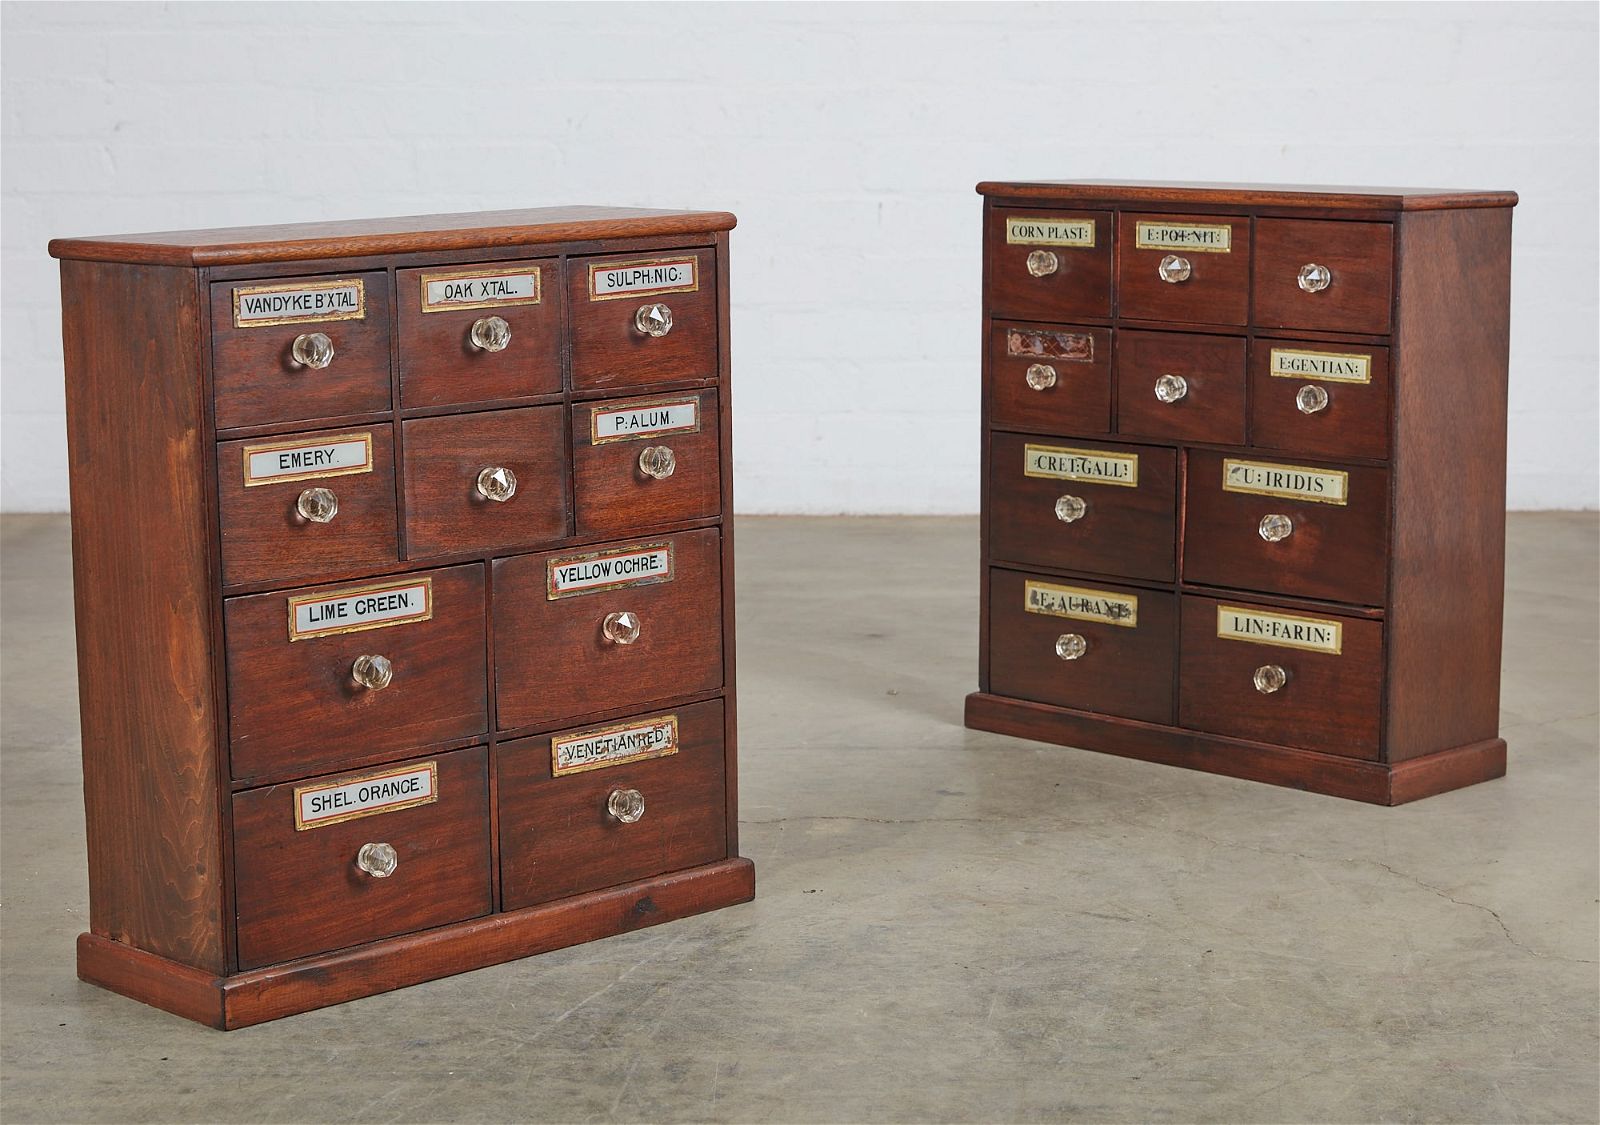 TWO APOTHECARY CABINETS, 19TH CENTURYTwo